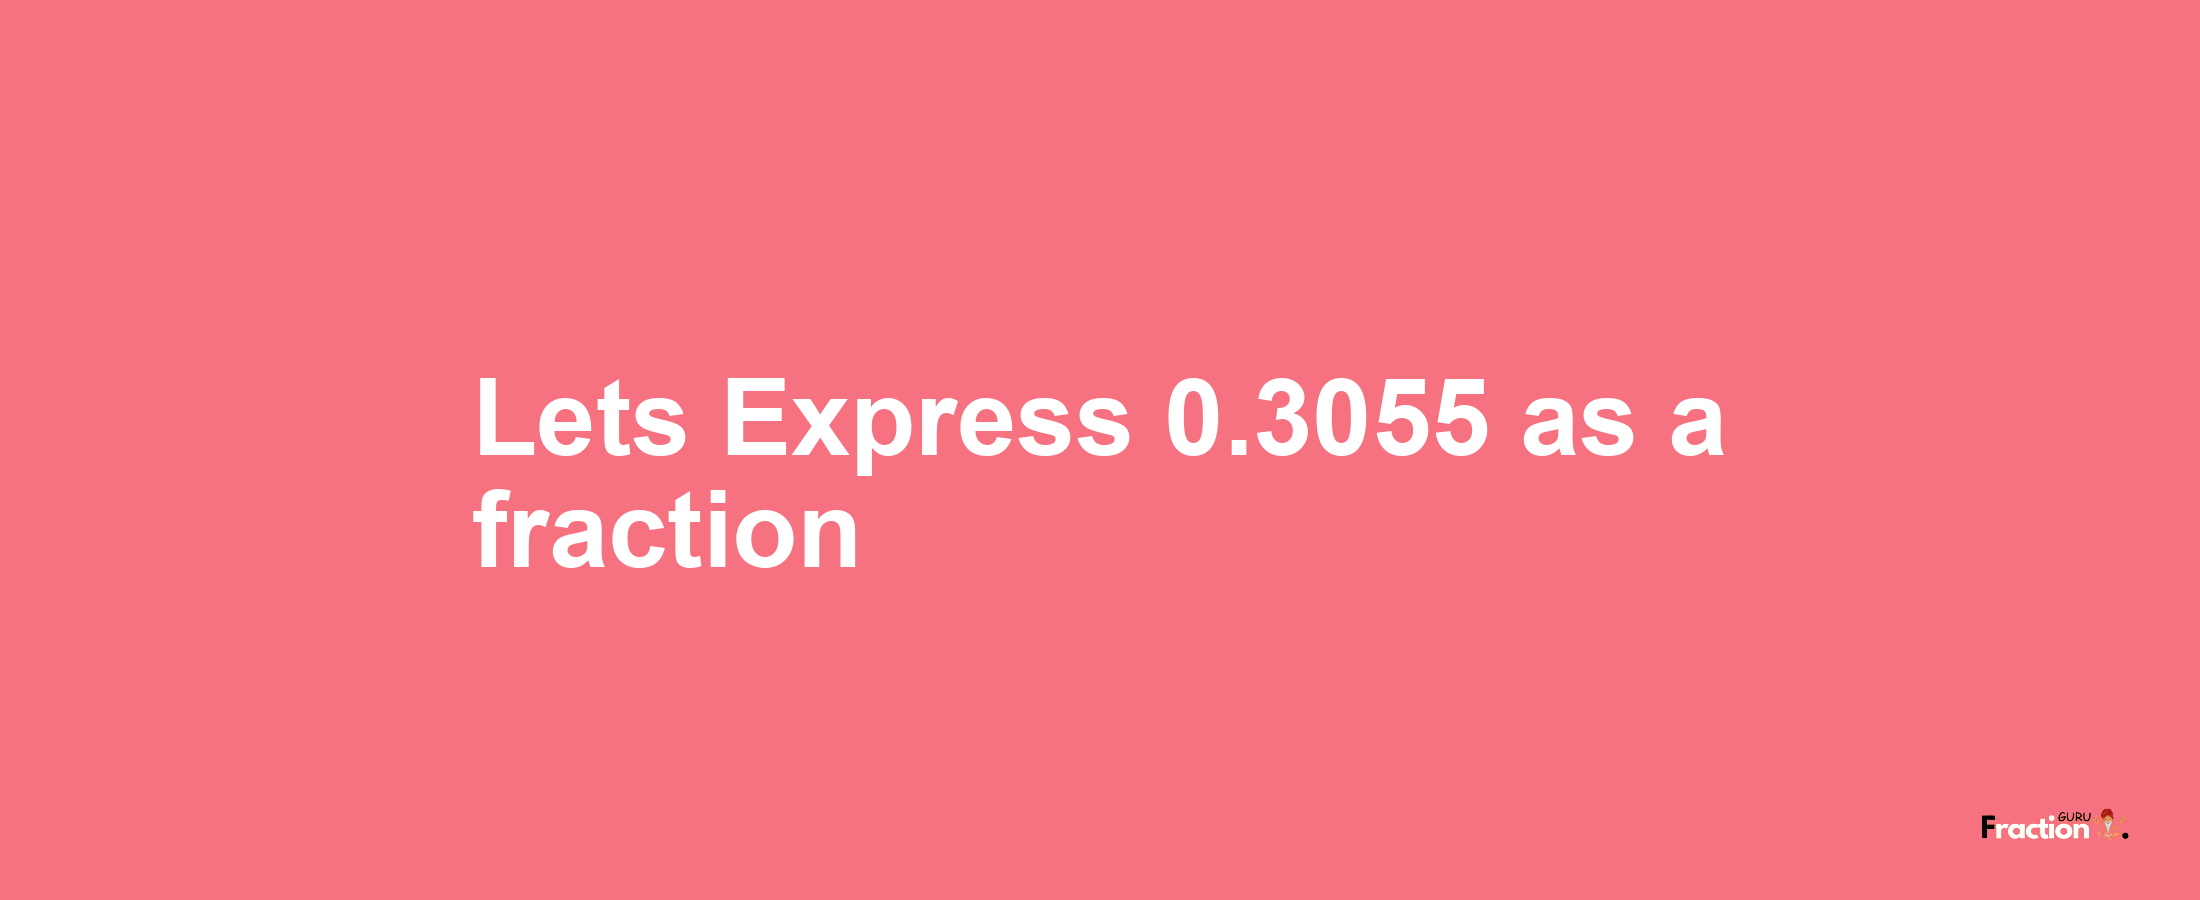 Lets Express 0.3055 as afraction